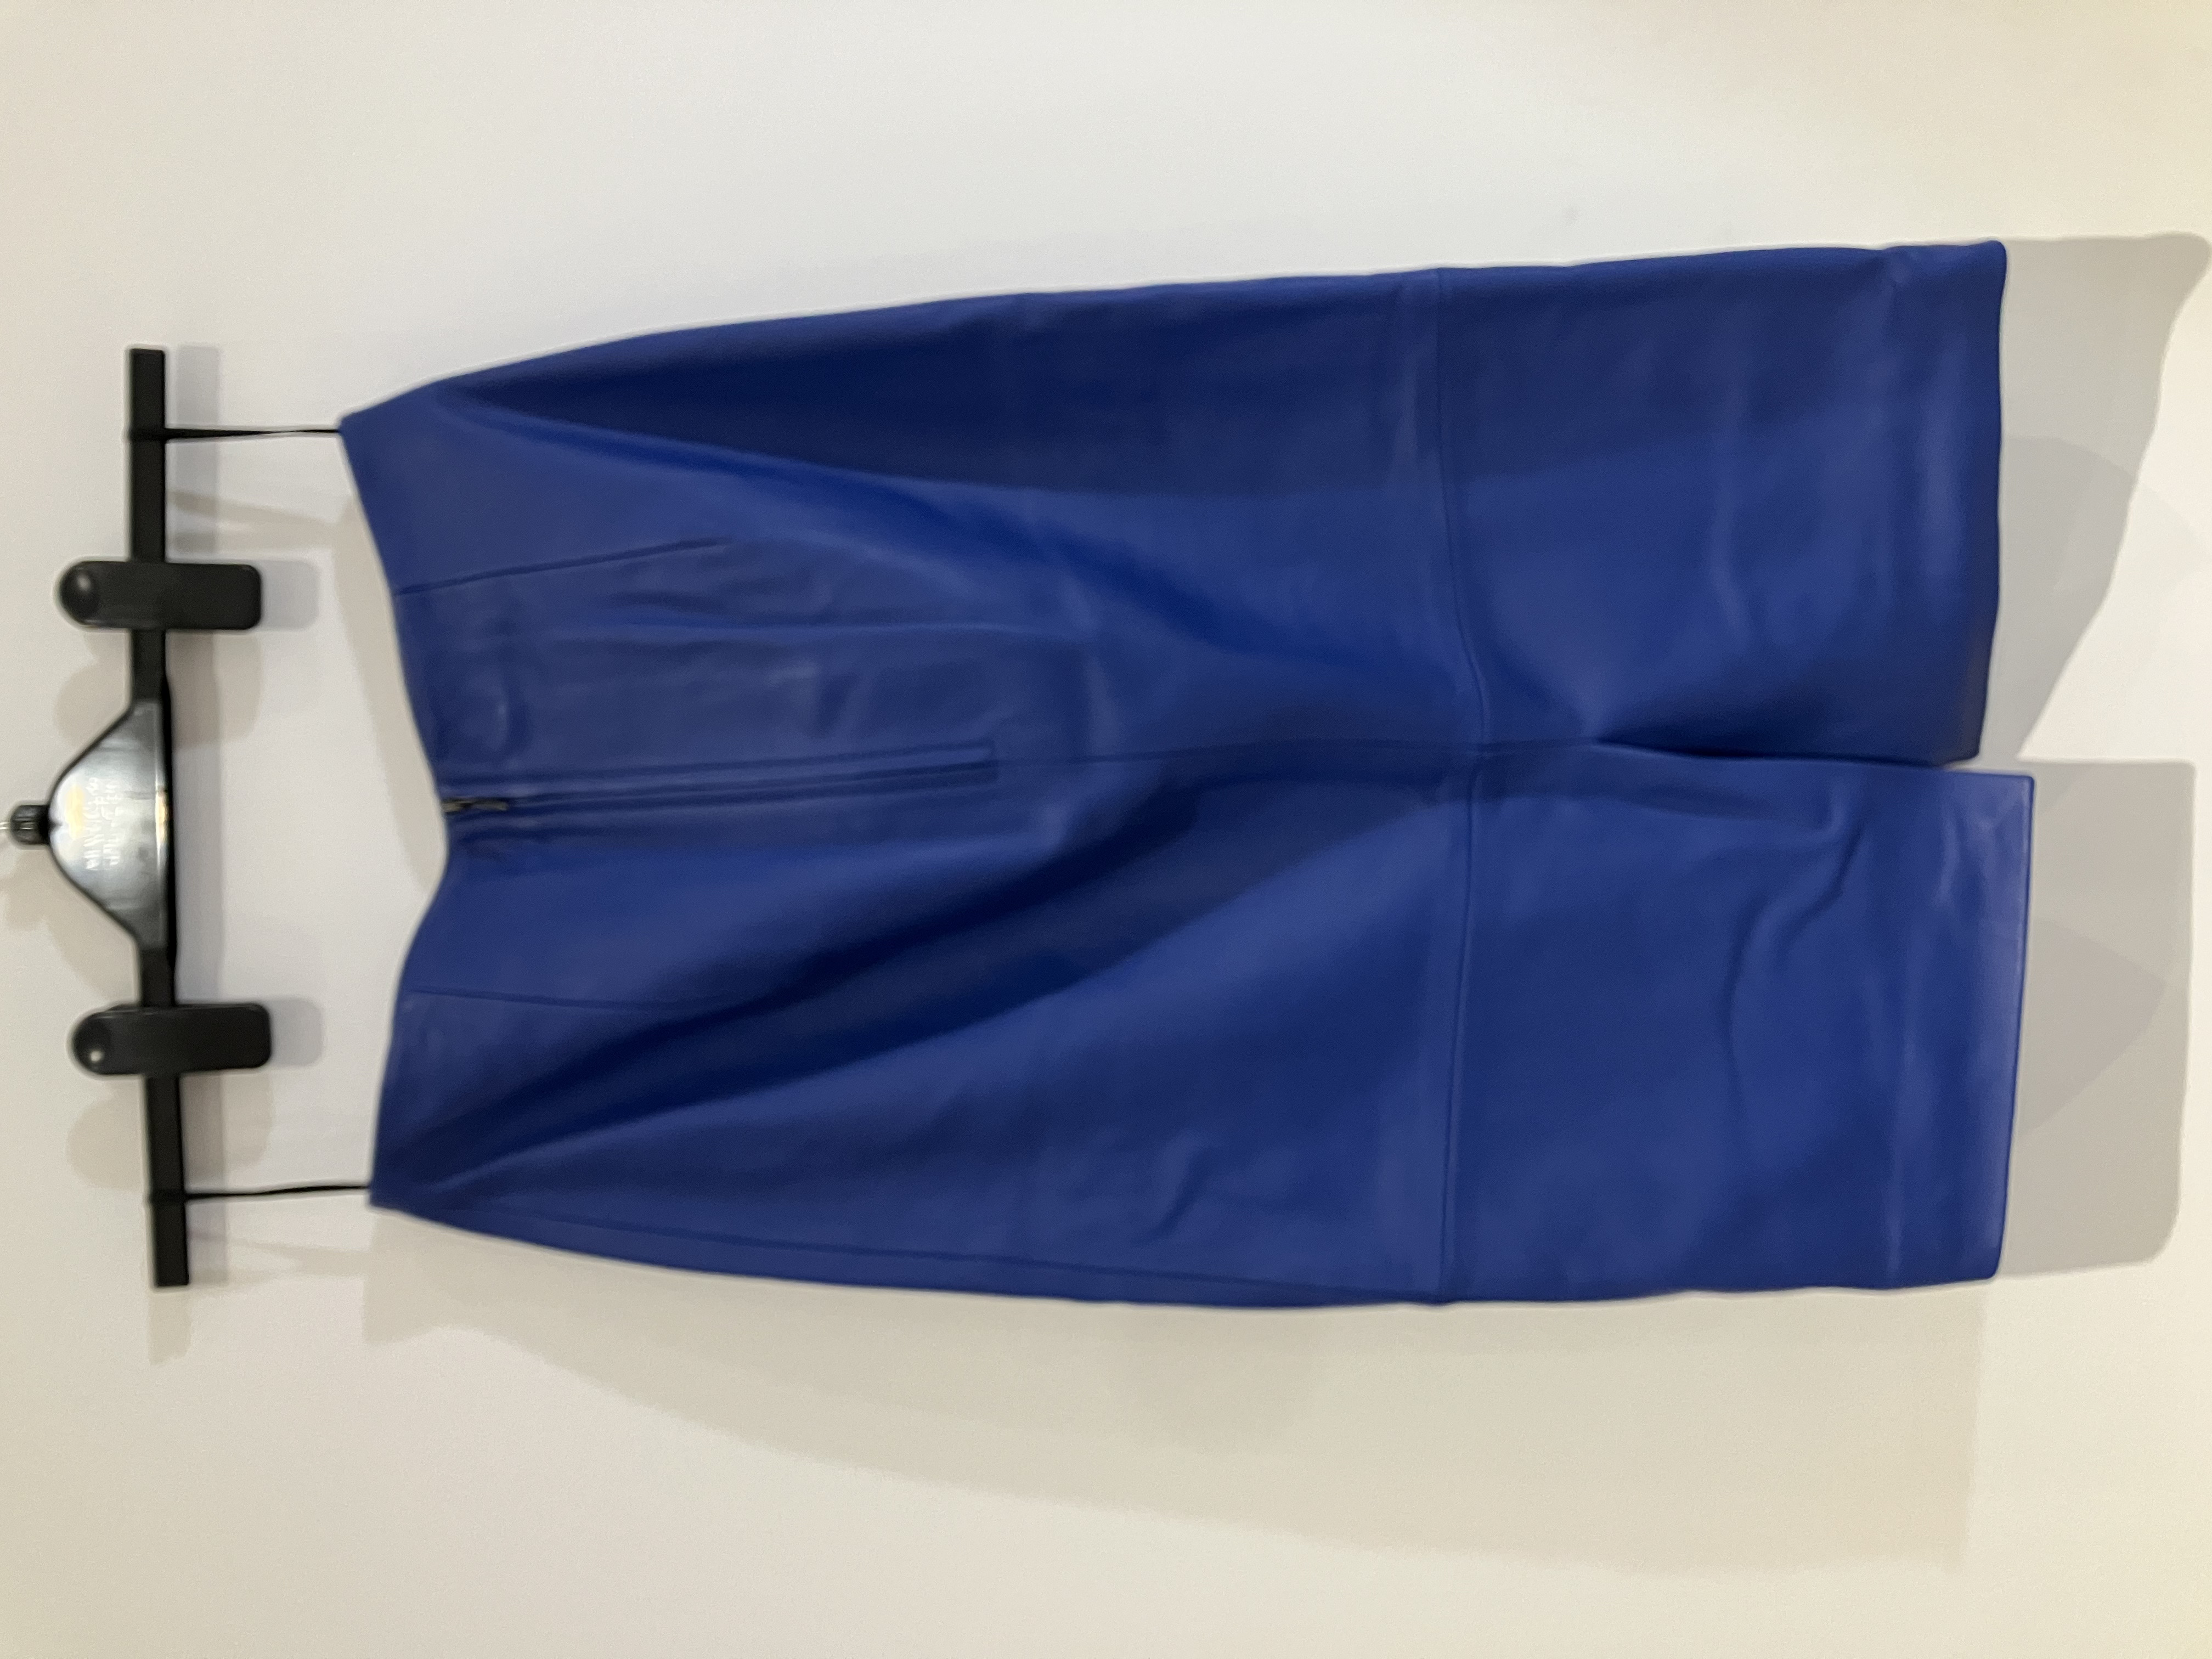 Hugo Boss Blue Leather Pencil Skirt Worn By A Body Double.